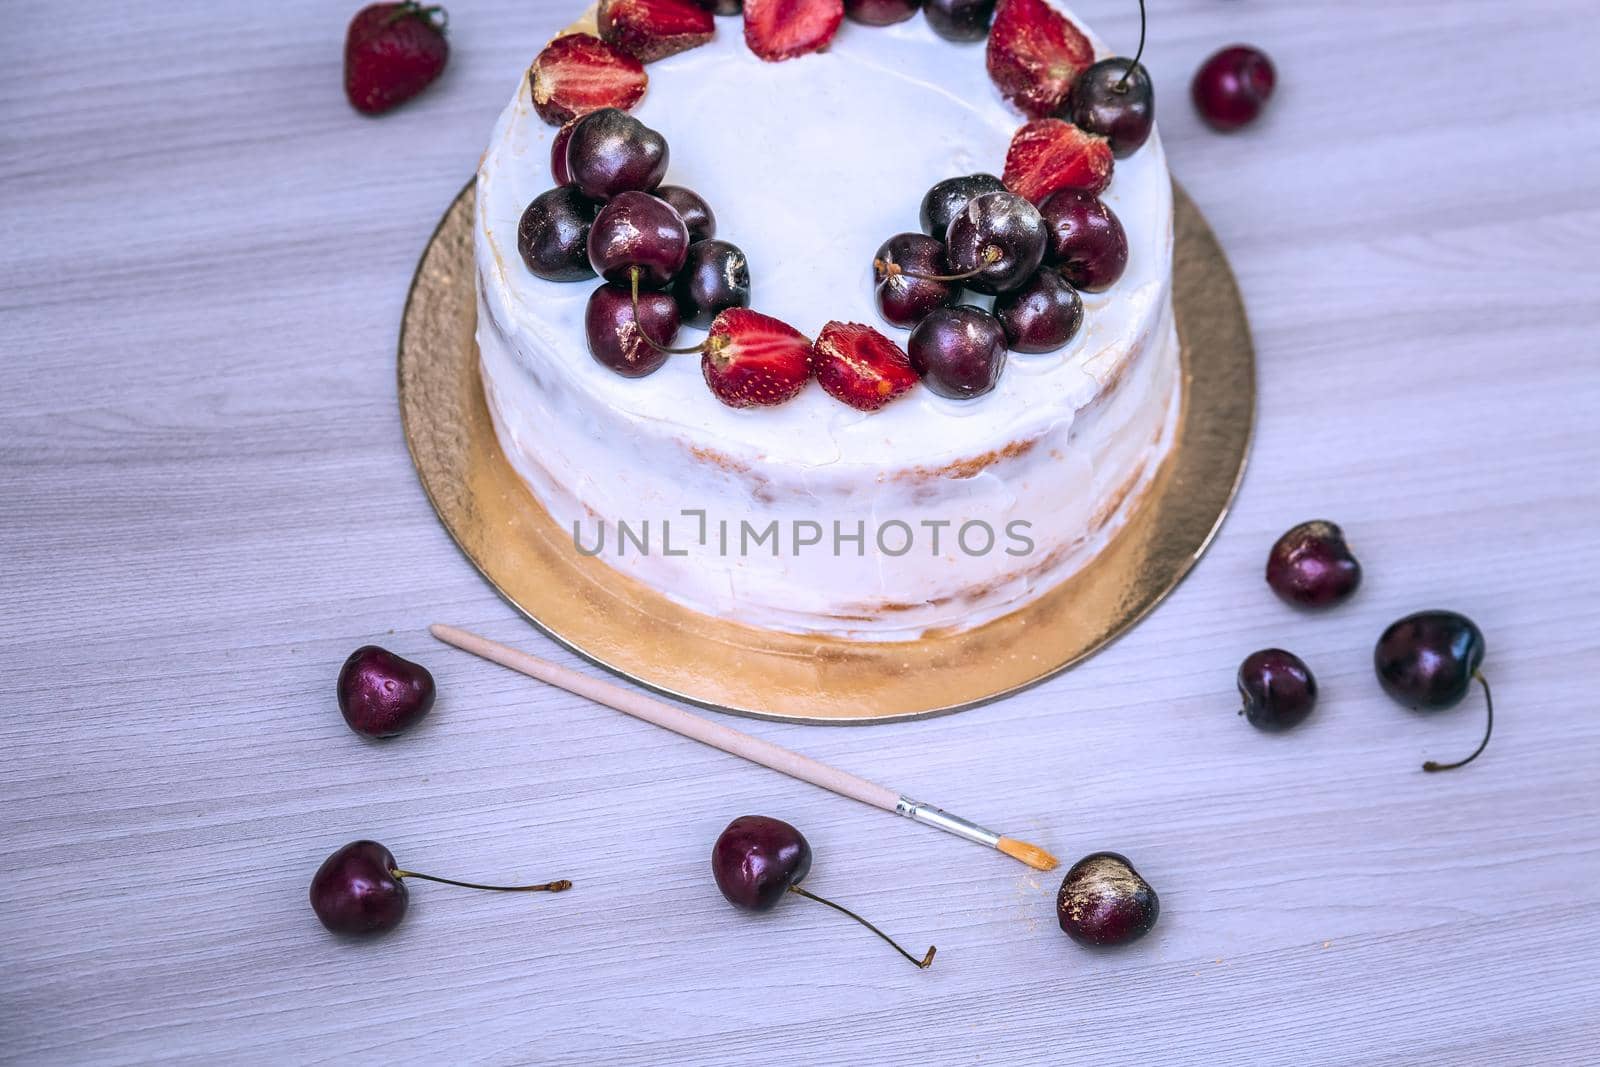 Cherries and strawberries with edible gold on top of cheesecake with coconut. Blue toning.